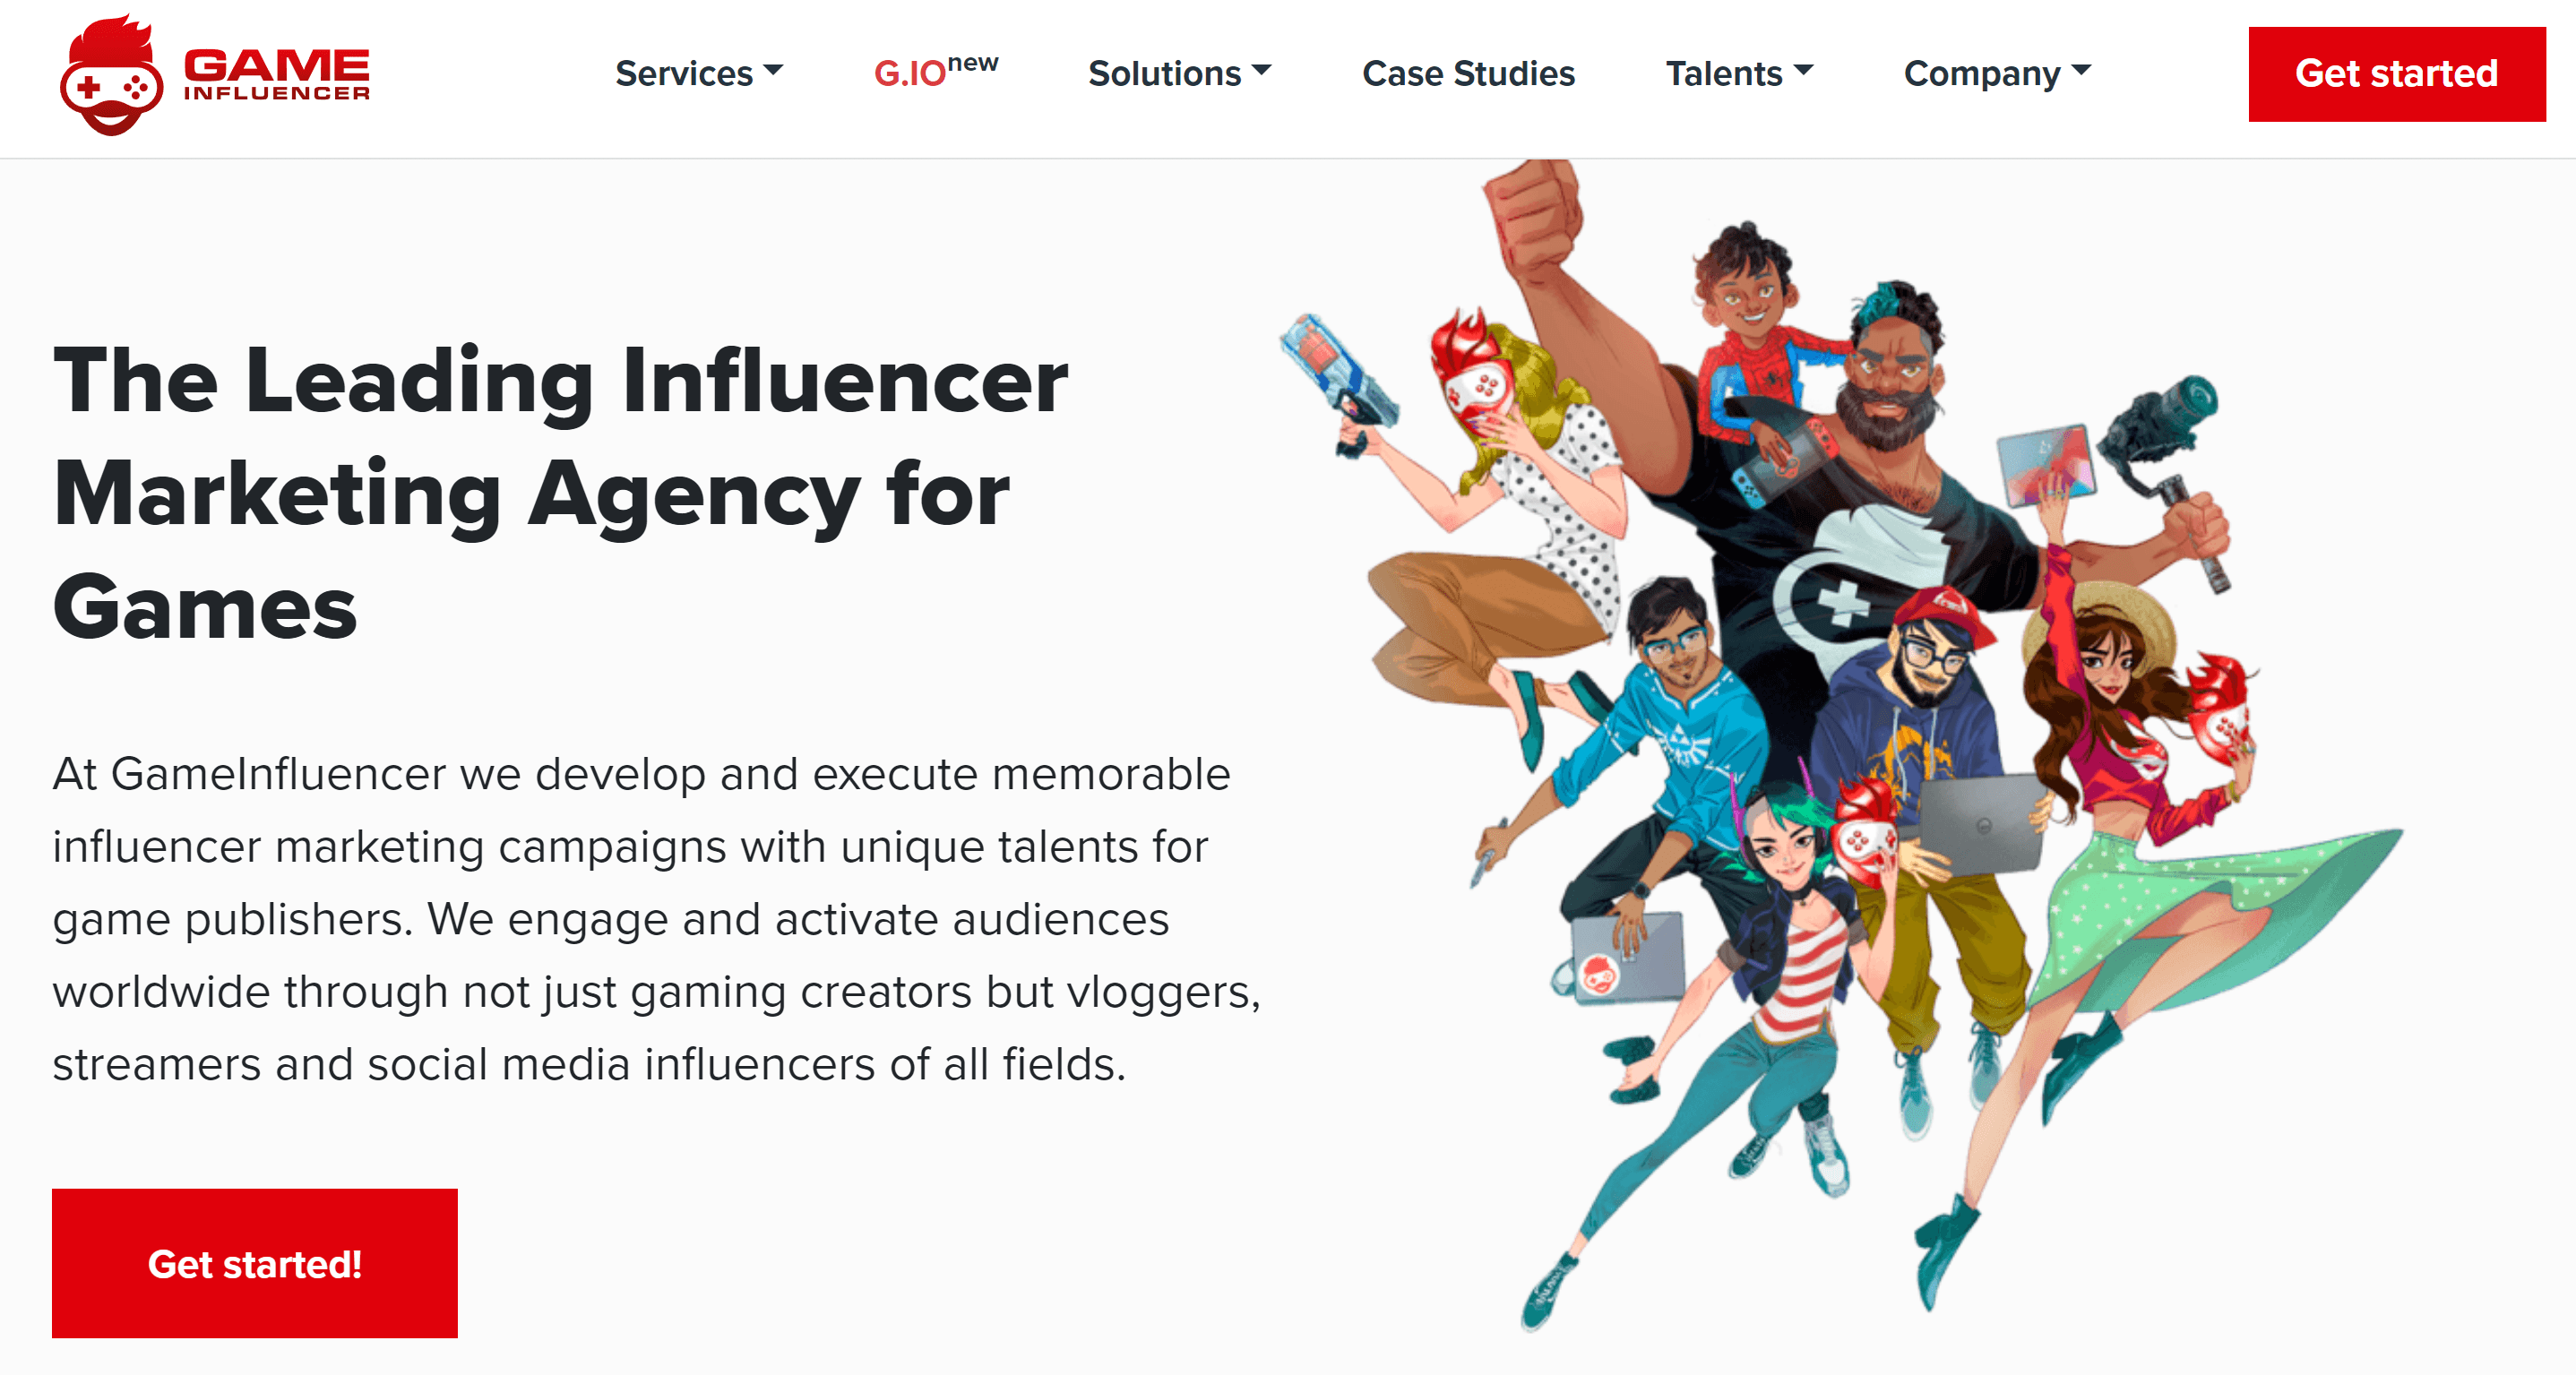 Meet The Top 10 Gaming Influencers in the US - Upfluence